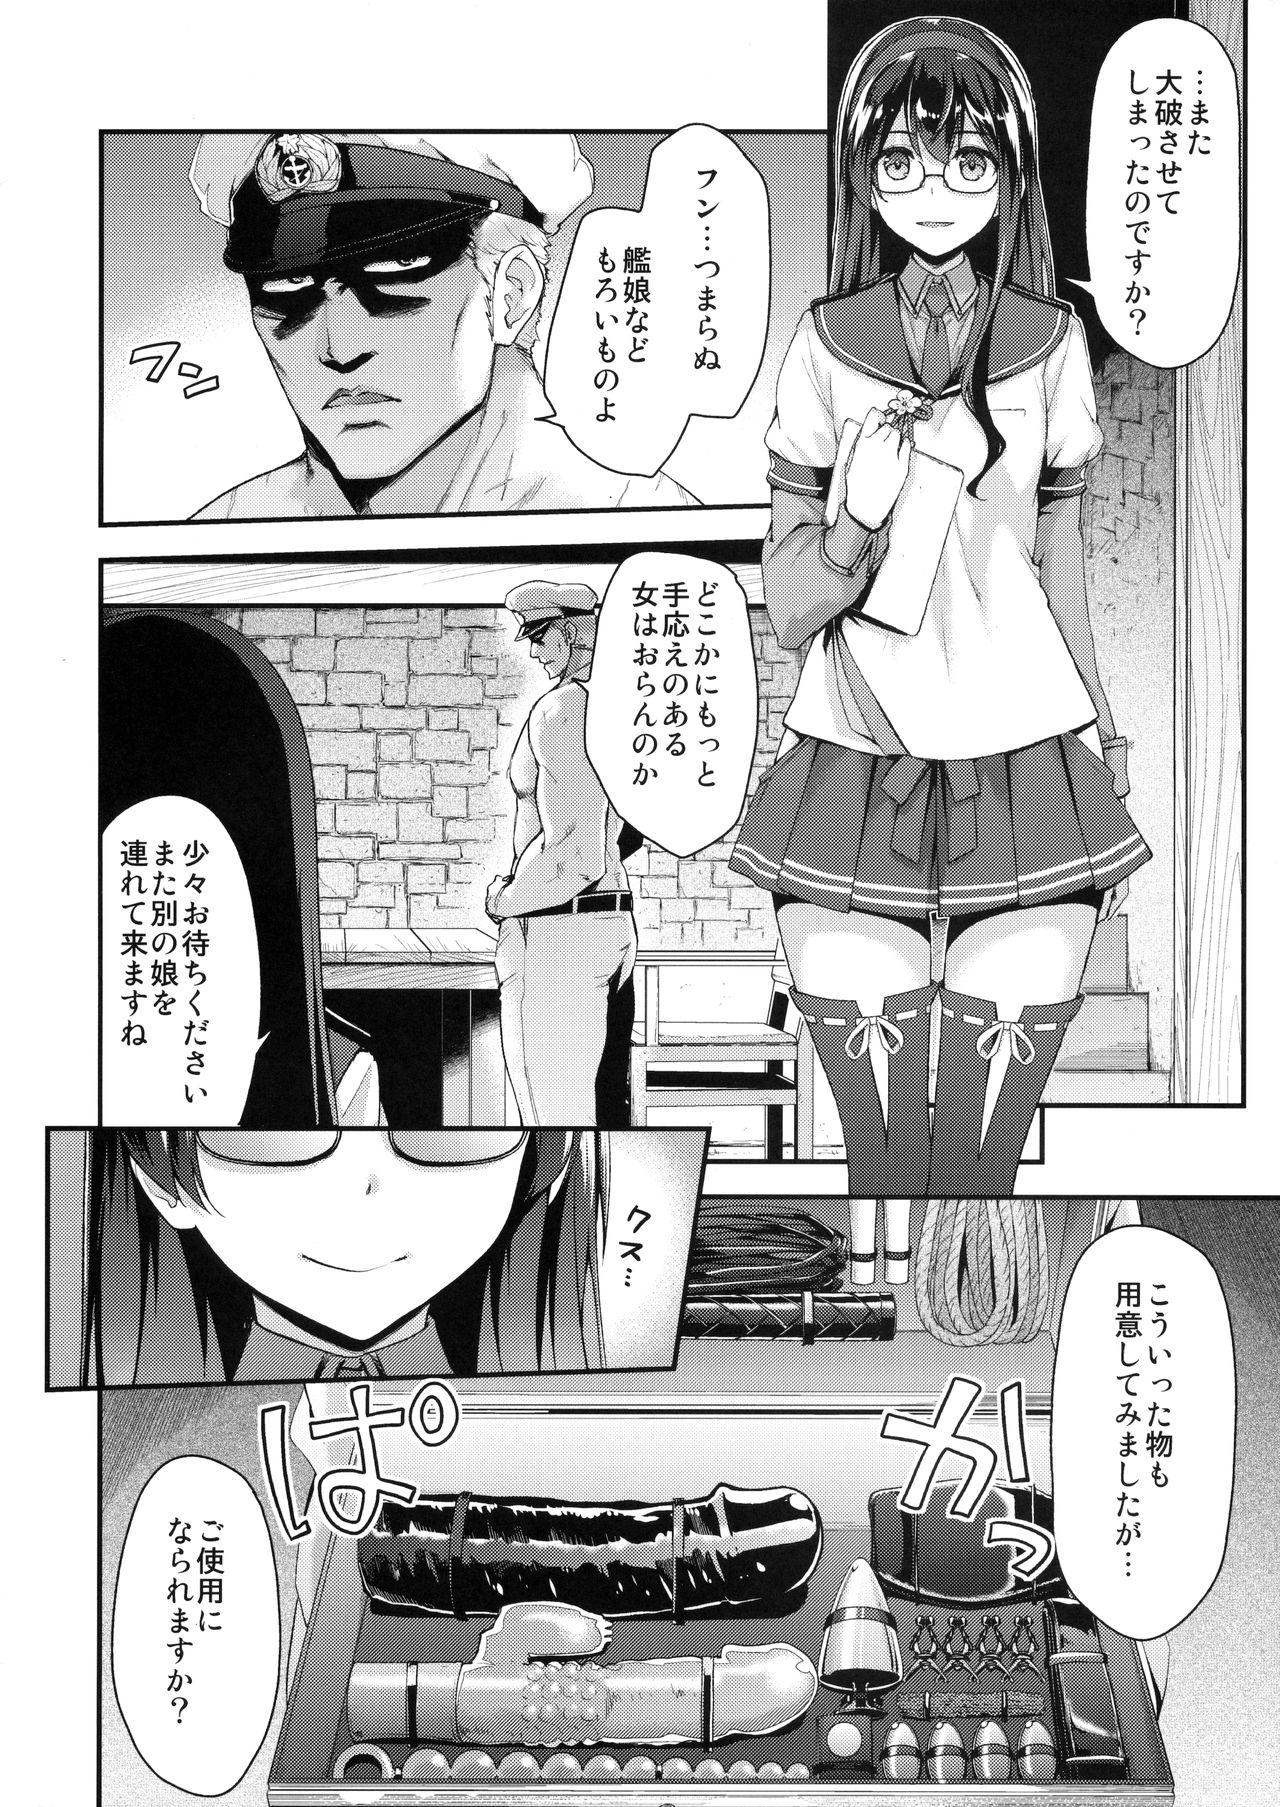 Mms Ooyodo Choukyou - Kantai collection Humiliation Pov - Page 5